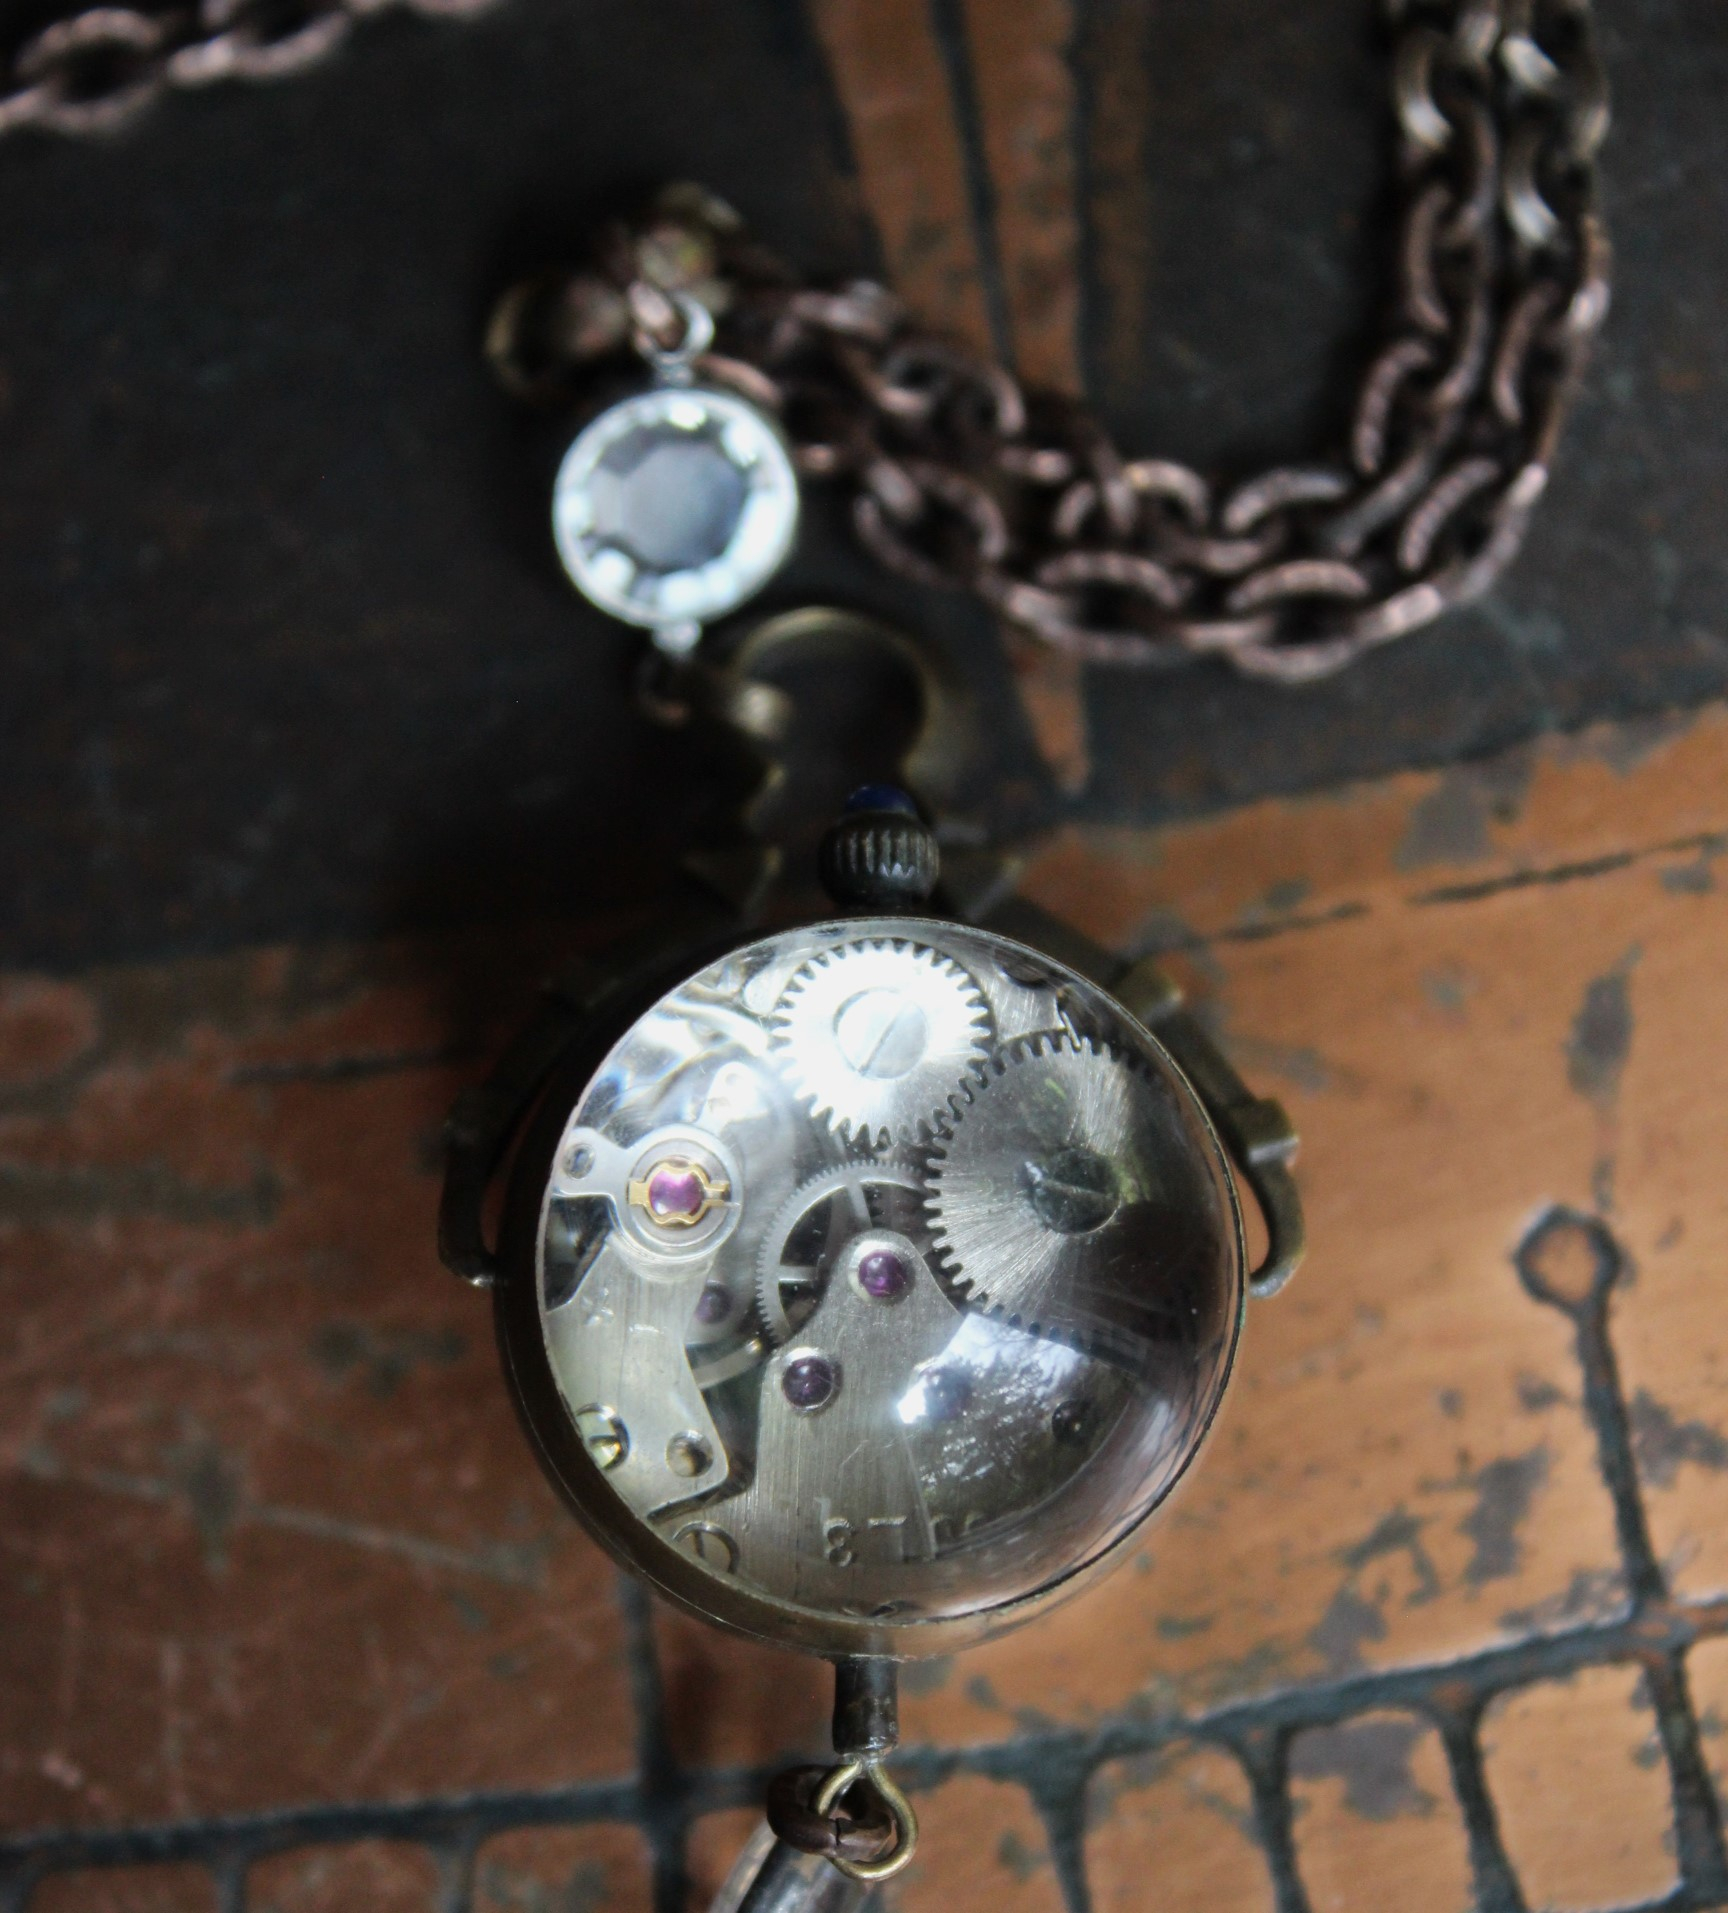 This Moment Necklace with RARE Antique WORKING 1882 Bubble Glass 19 Jewel Mechanical Watch Pendant Necklace with Bezel Set Crystals,Bronze Chain